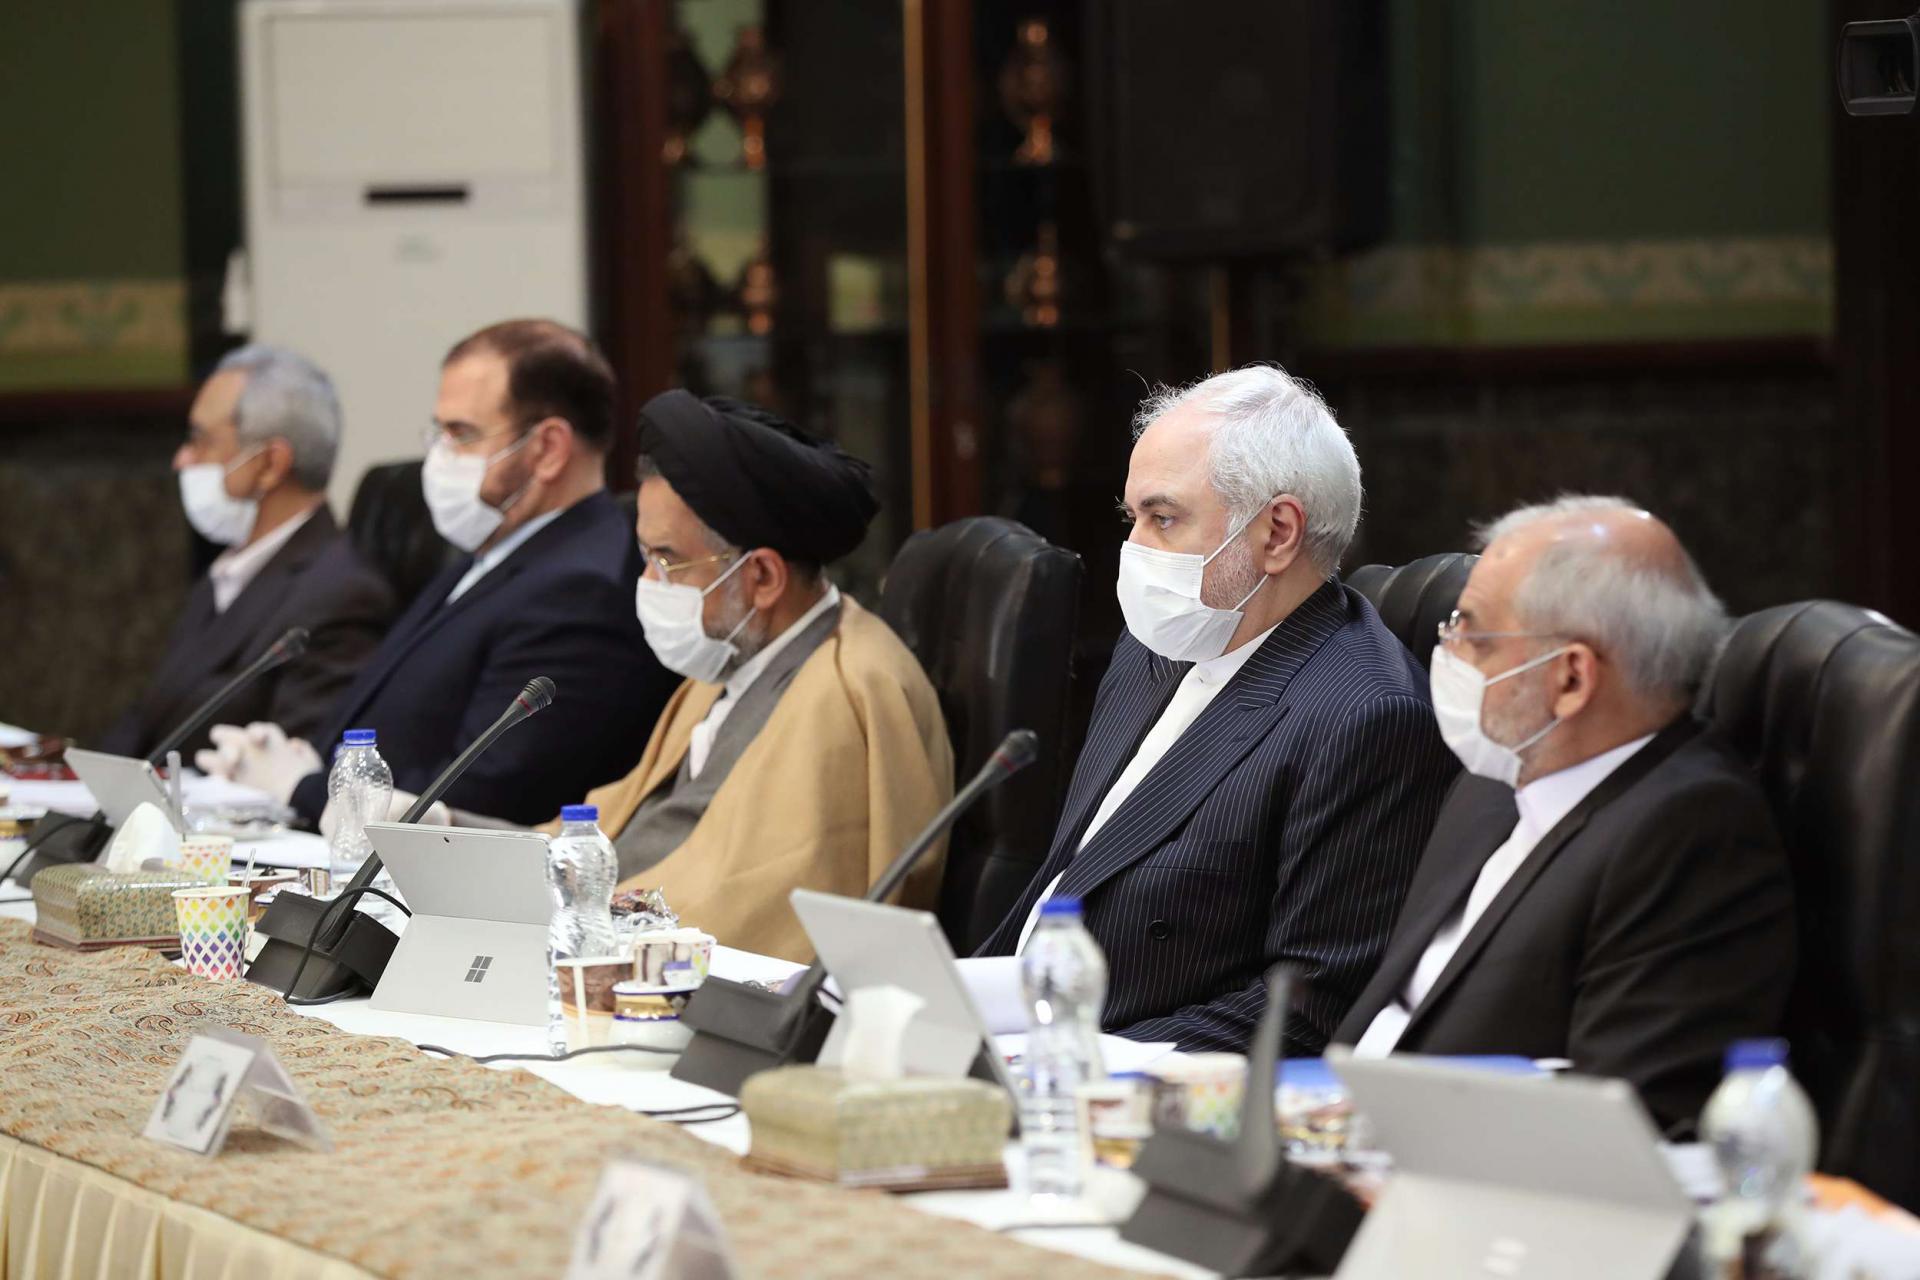 The government of President Hassan Rouhani has struggled to contain the outbreak that emerged two months ago